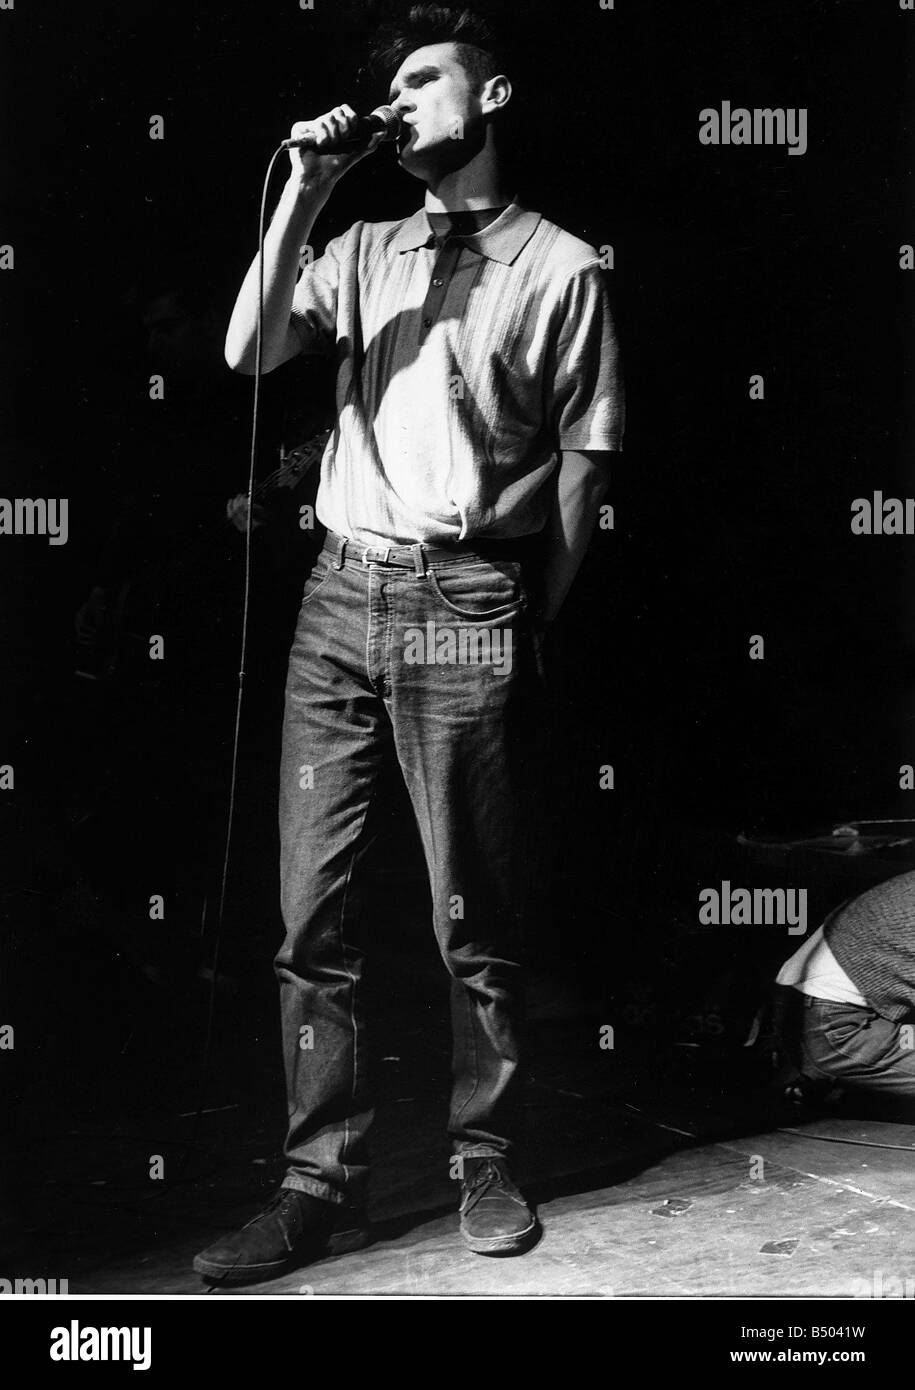 The Smiths pop singer Morrissey singing on stage 1984 Stock Photo